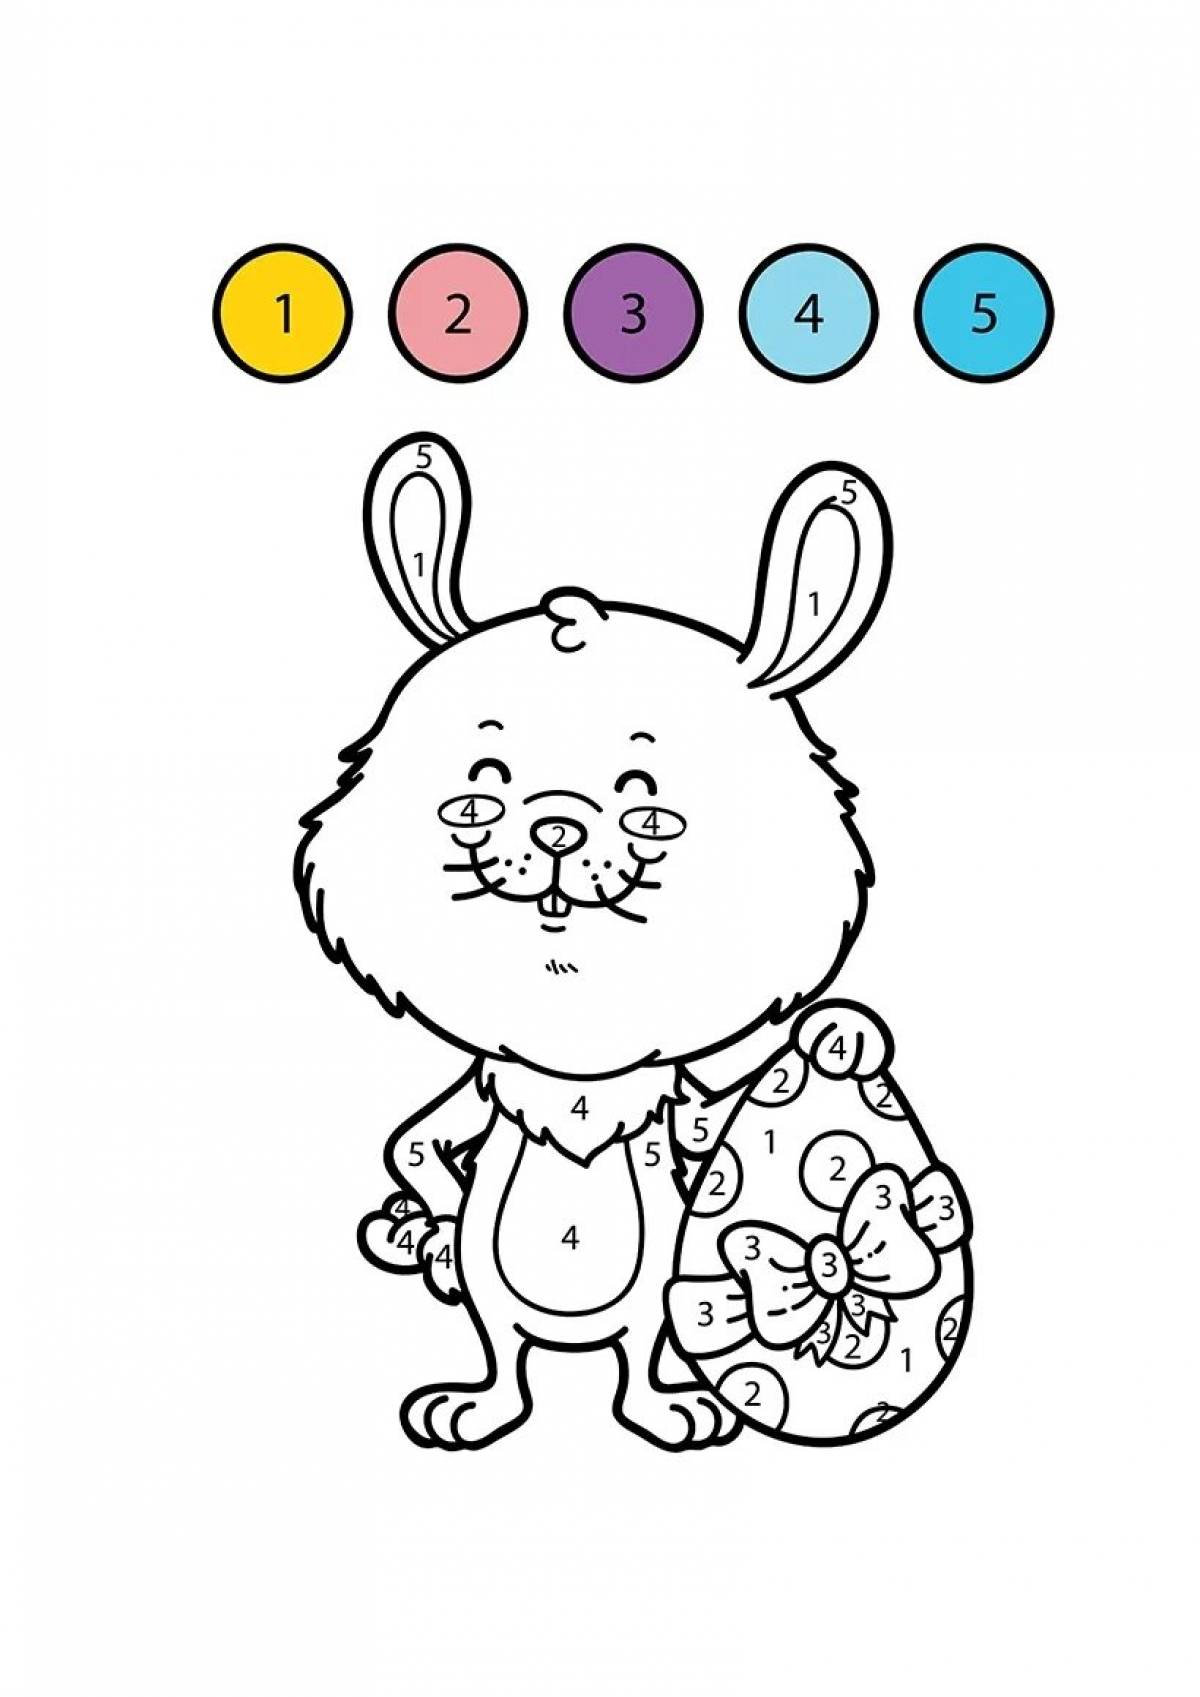 Coloring perfect hare by numbers